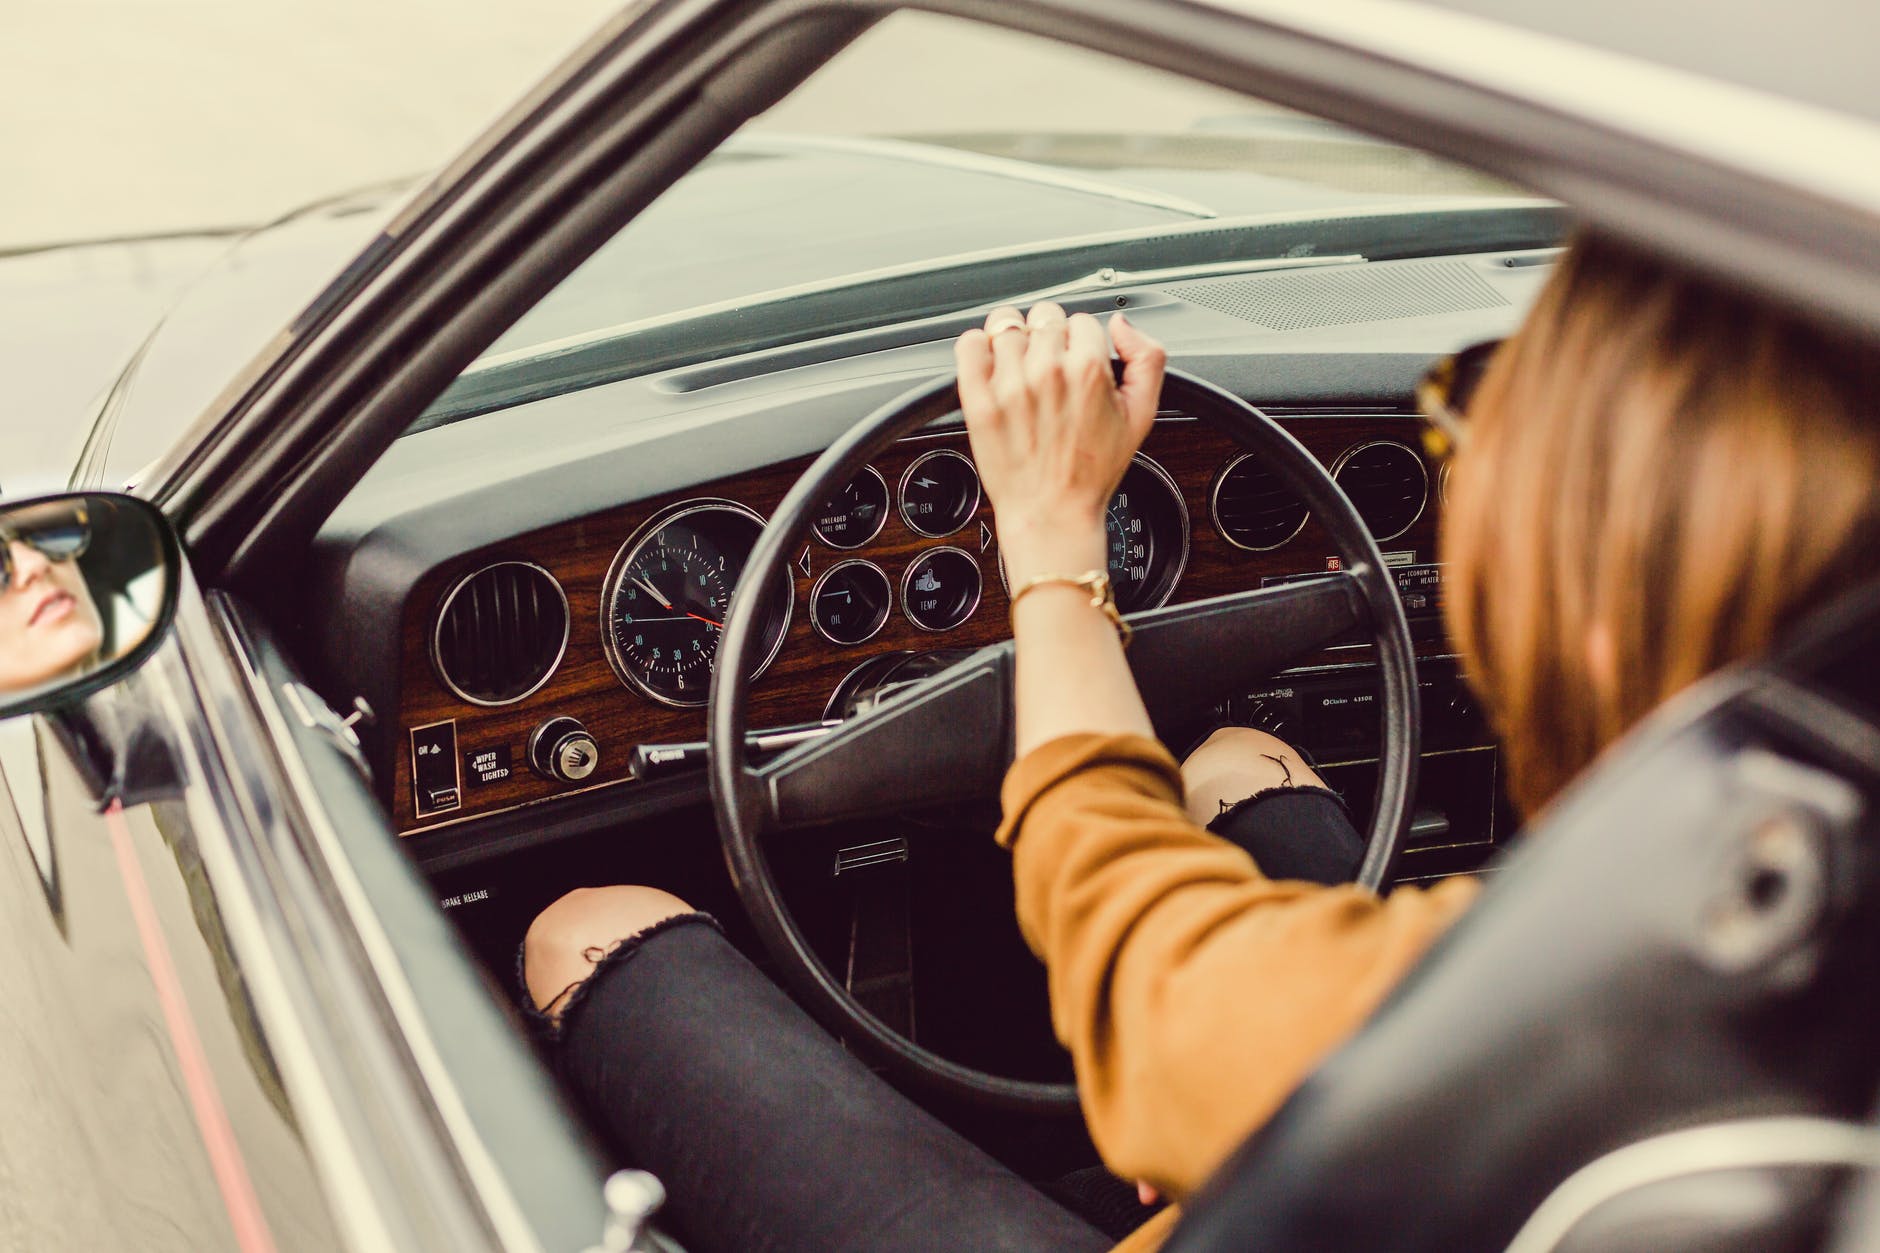 She went back to her car, after sensing dangerous vibes from the man. | Source: Pexels